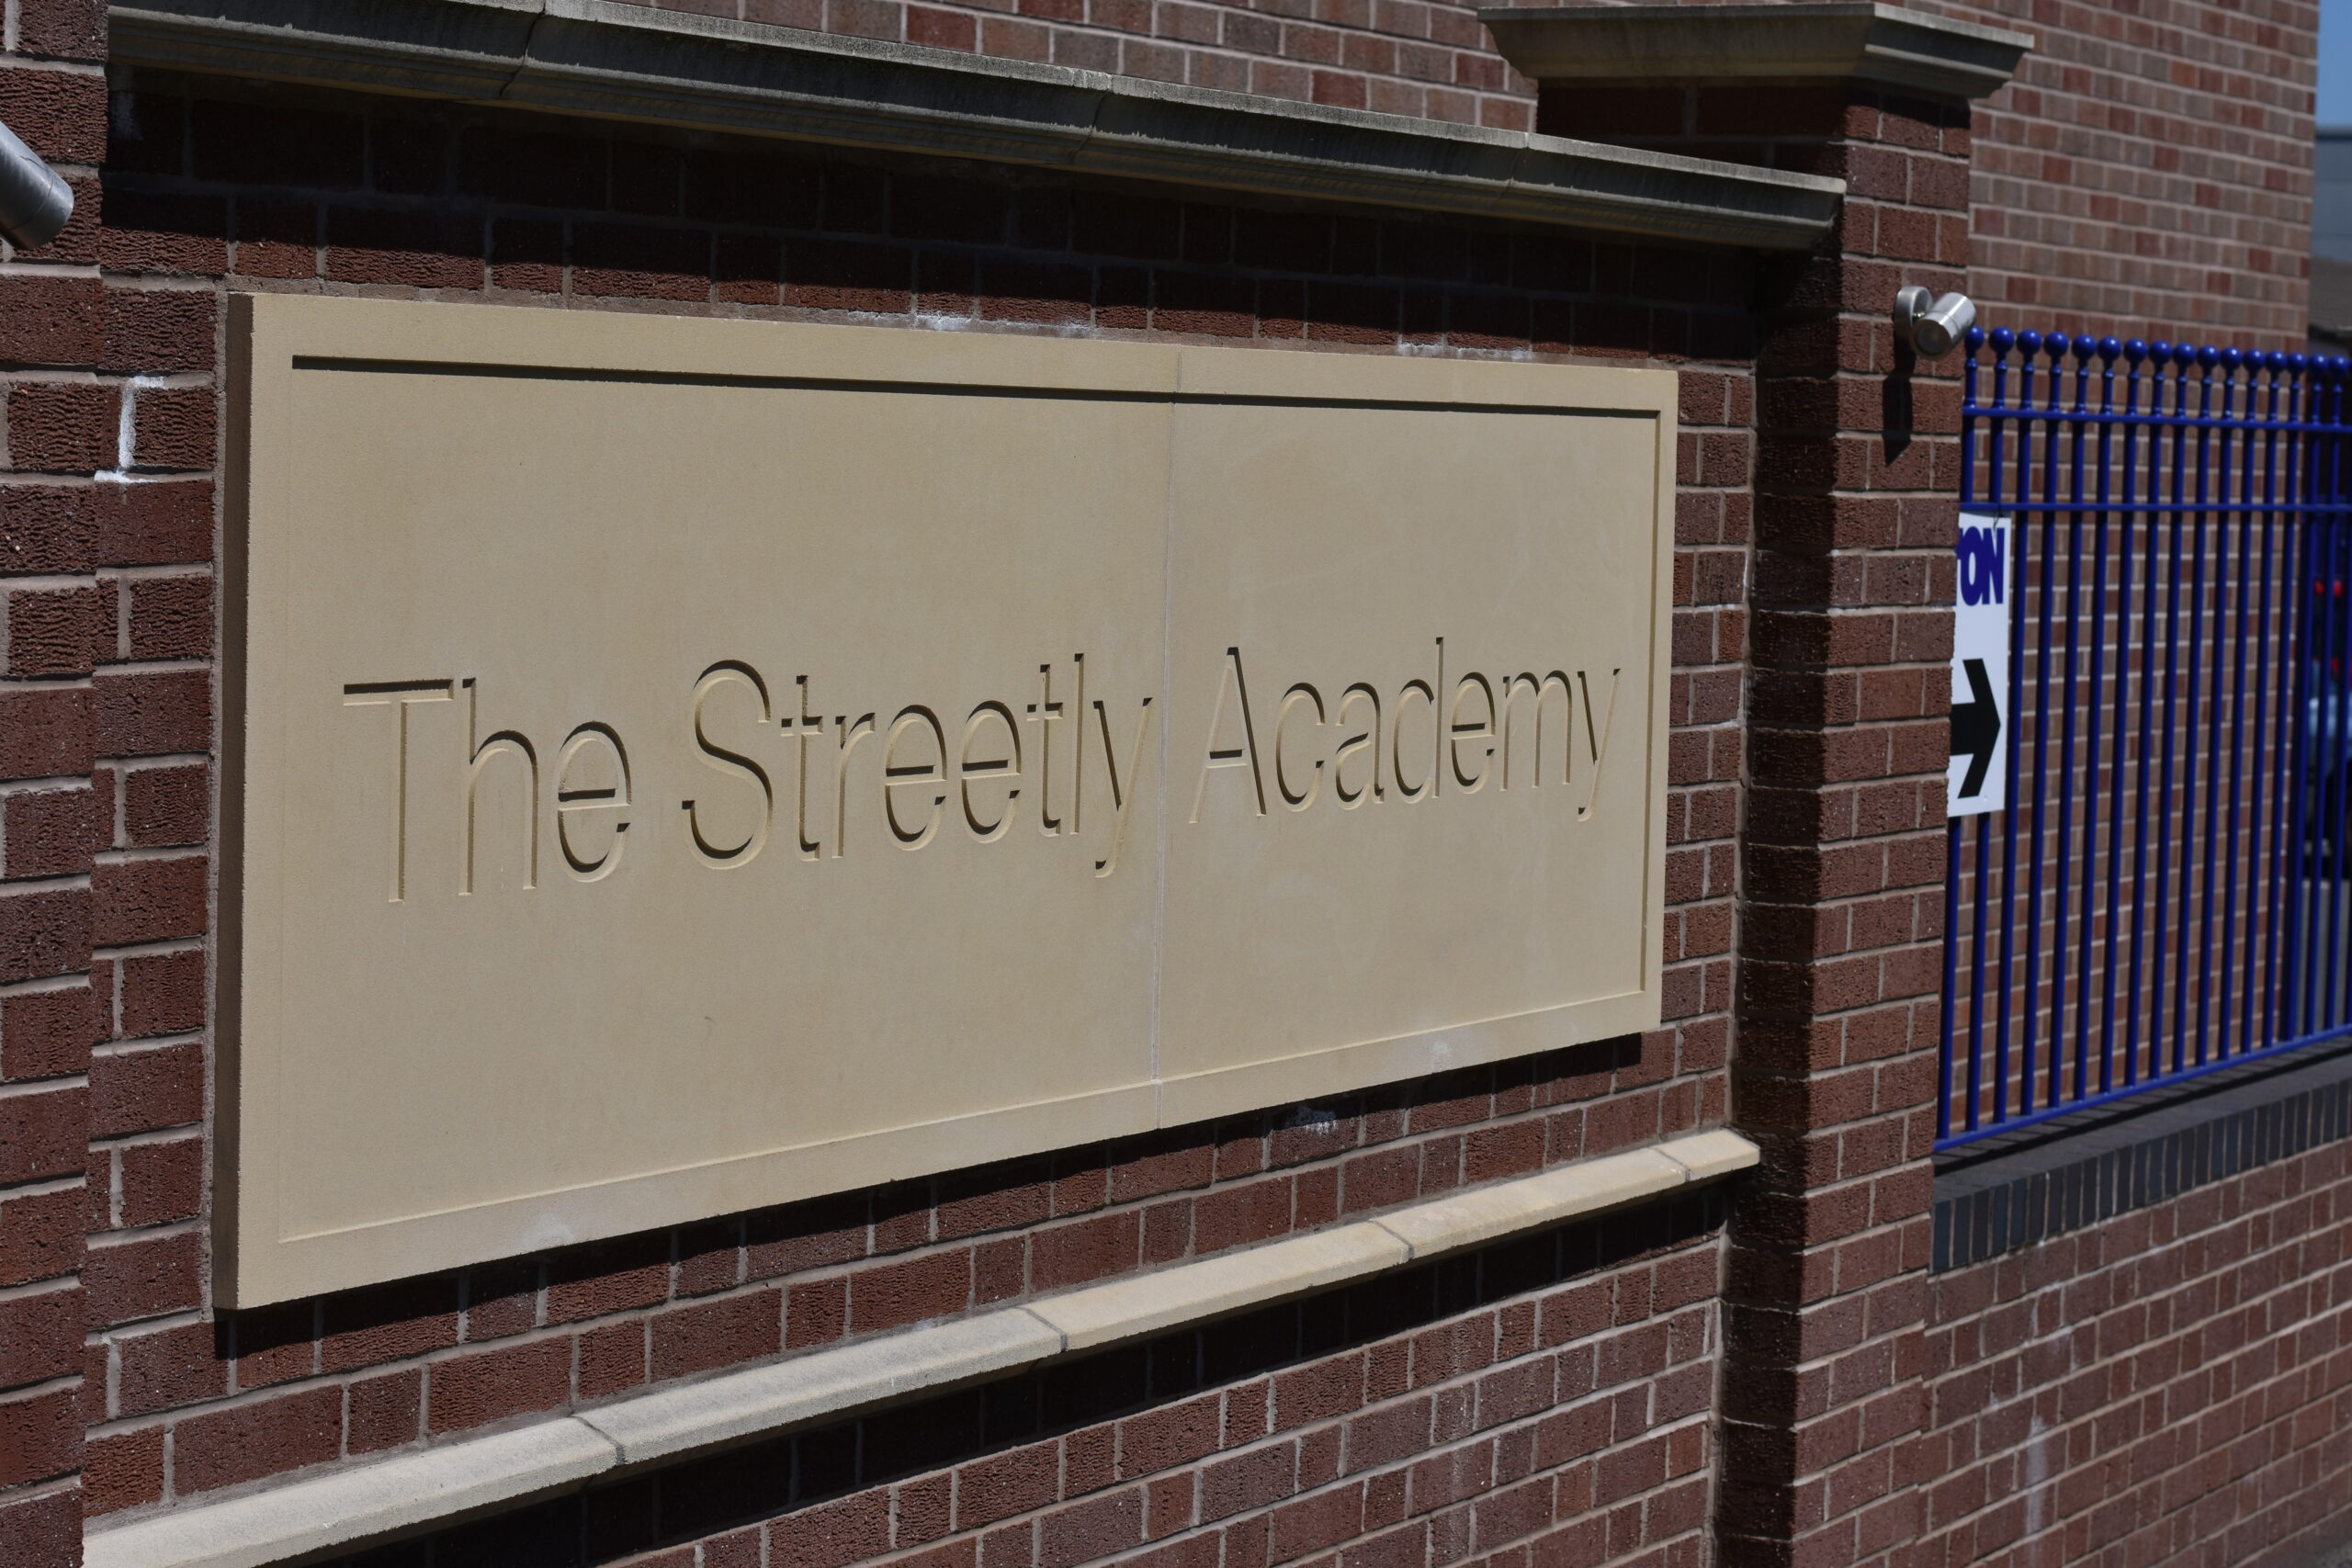 Department for Education Funding for The Streetly Academy